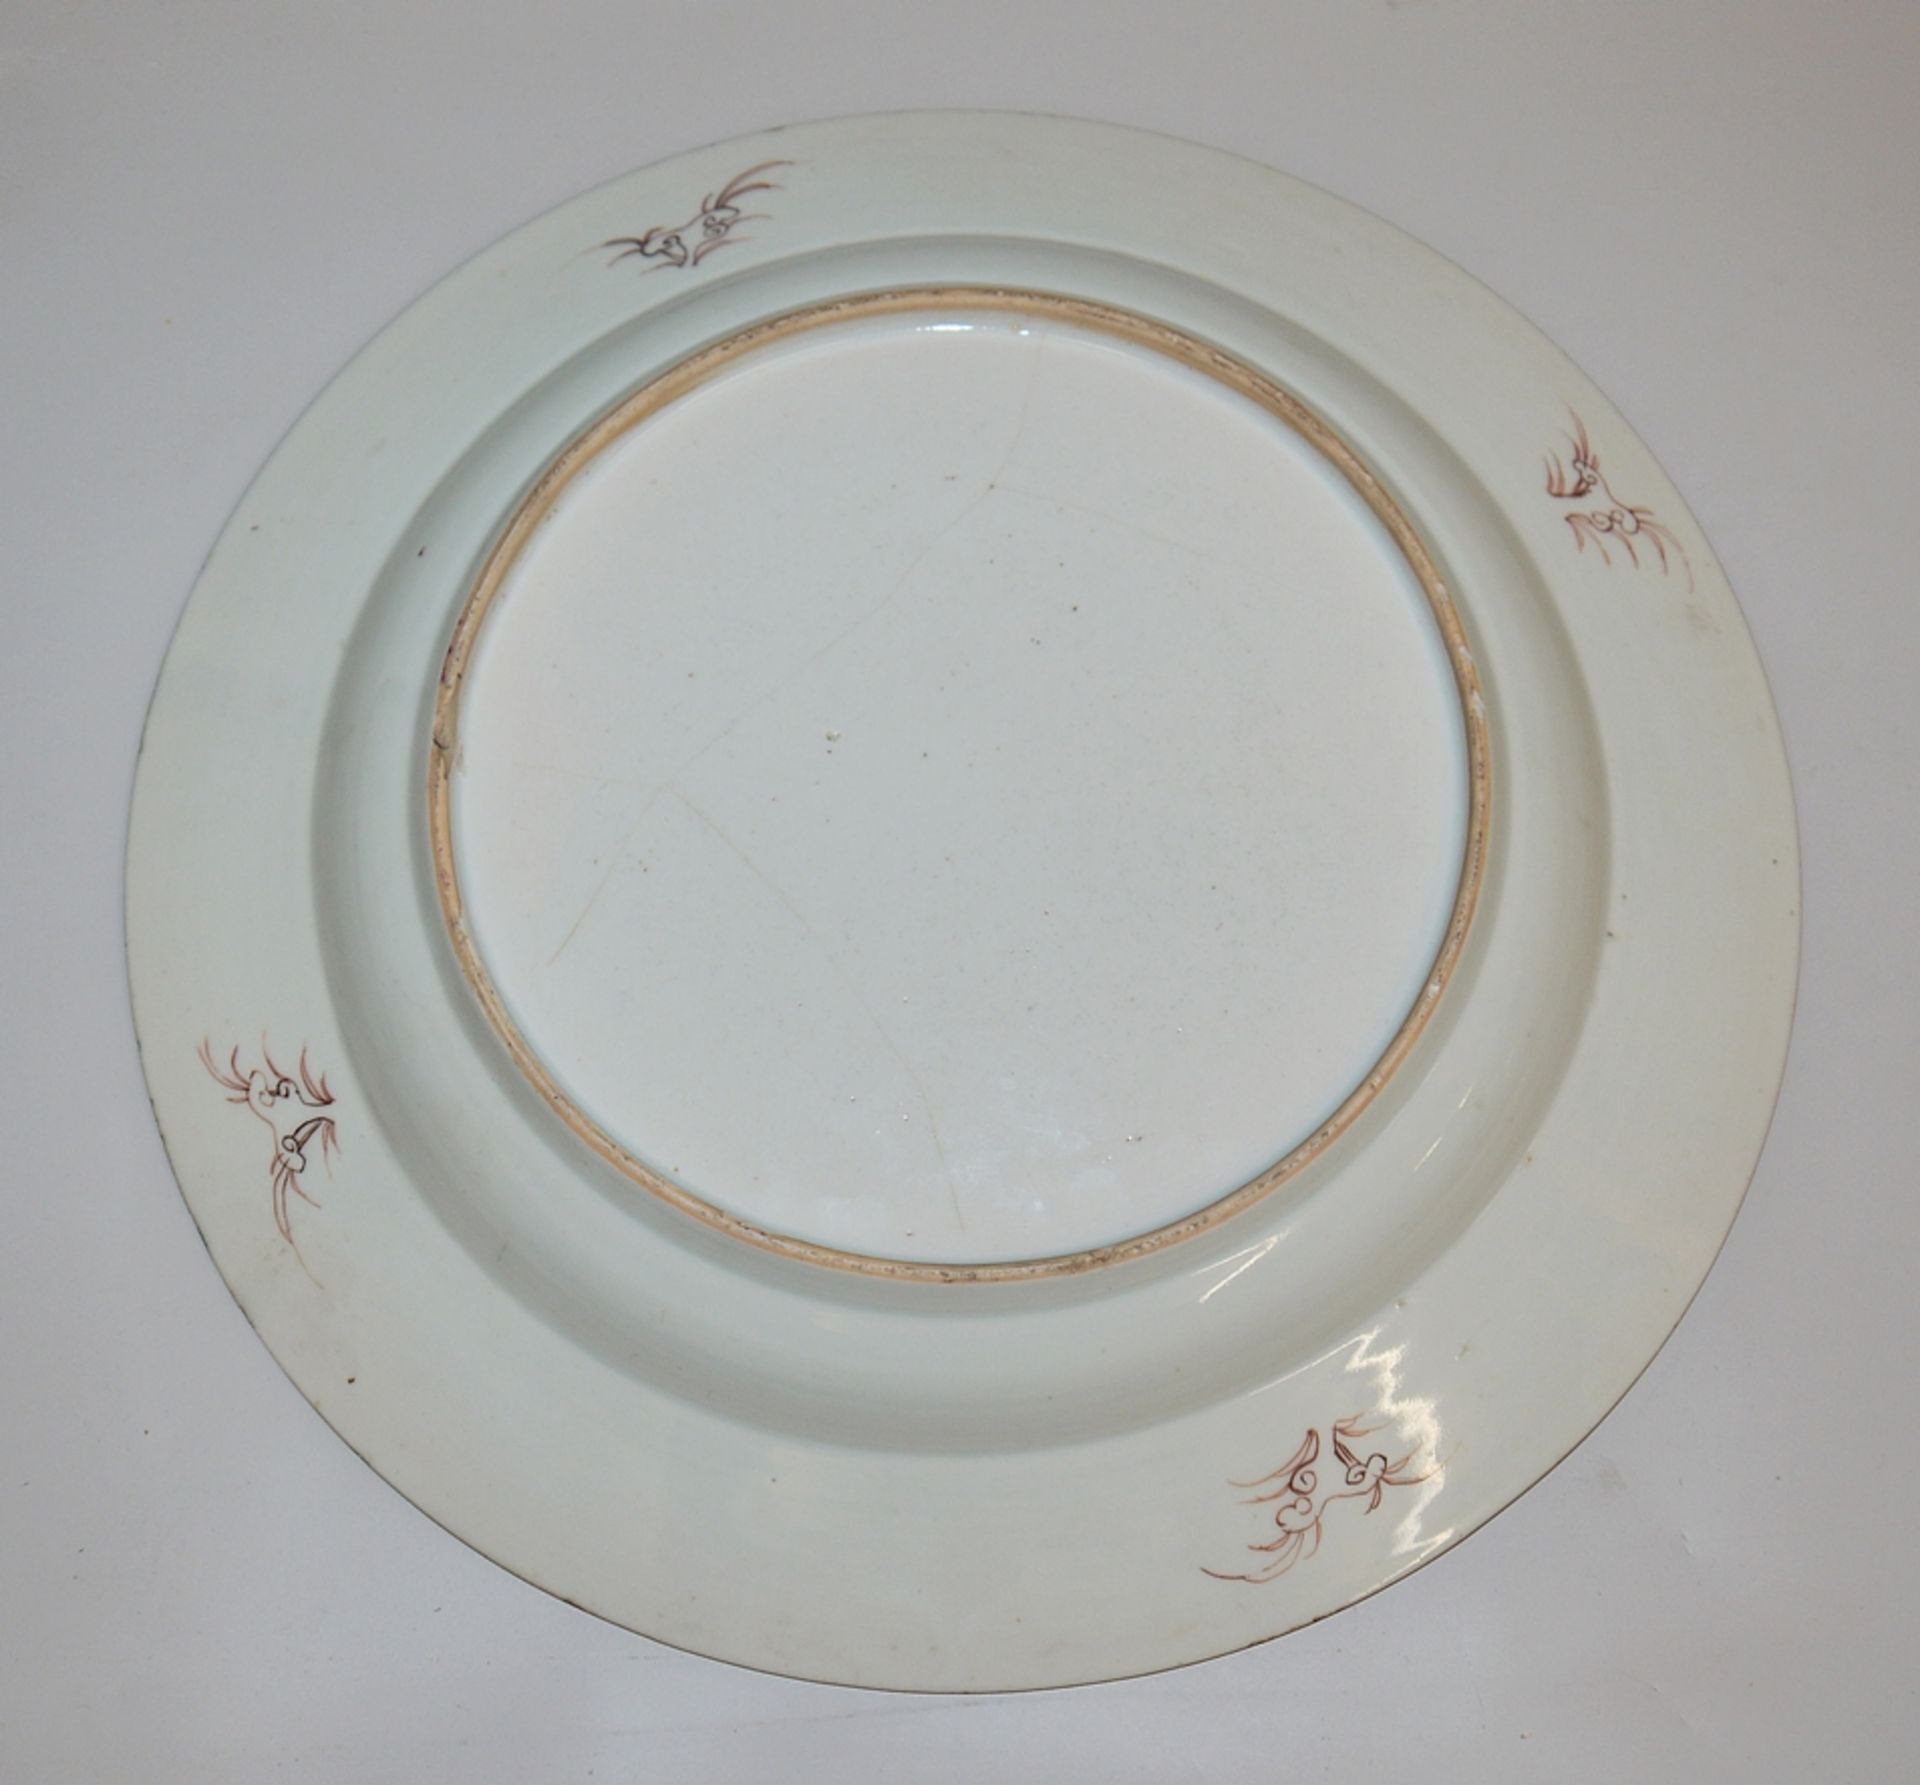 Large porcelain plate from the Yongzheng period, China circa 1730 - Image 2 of 2